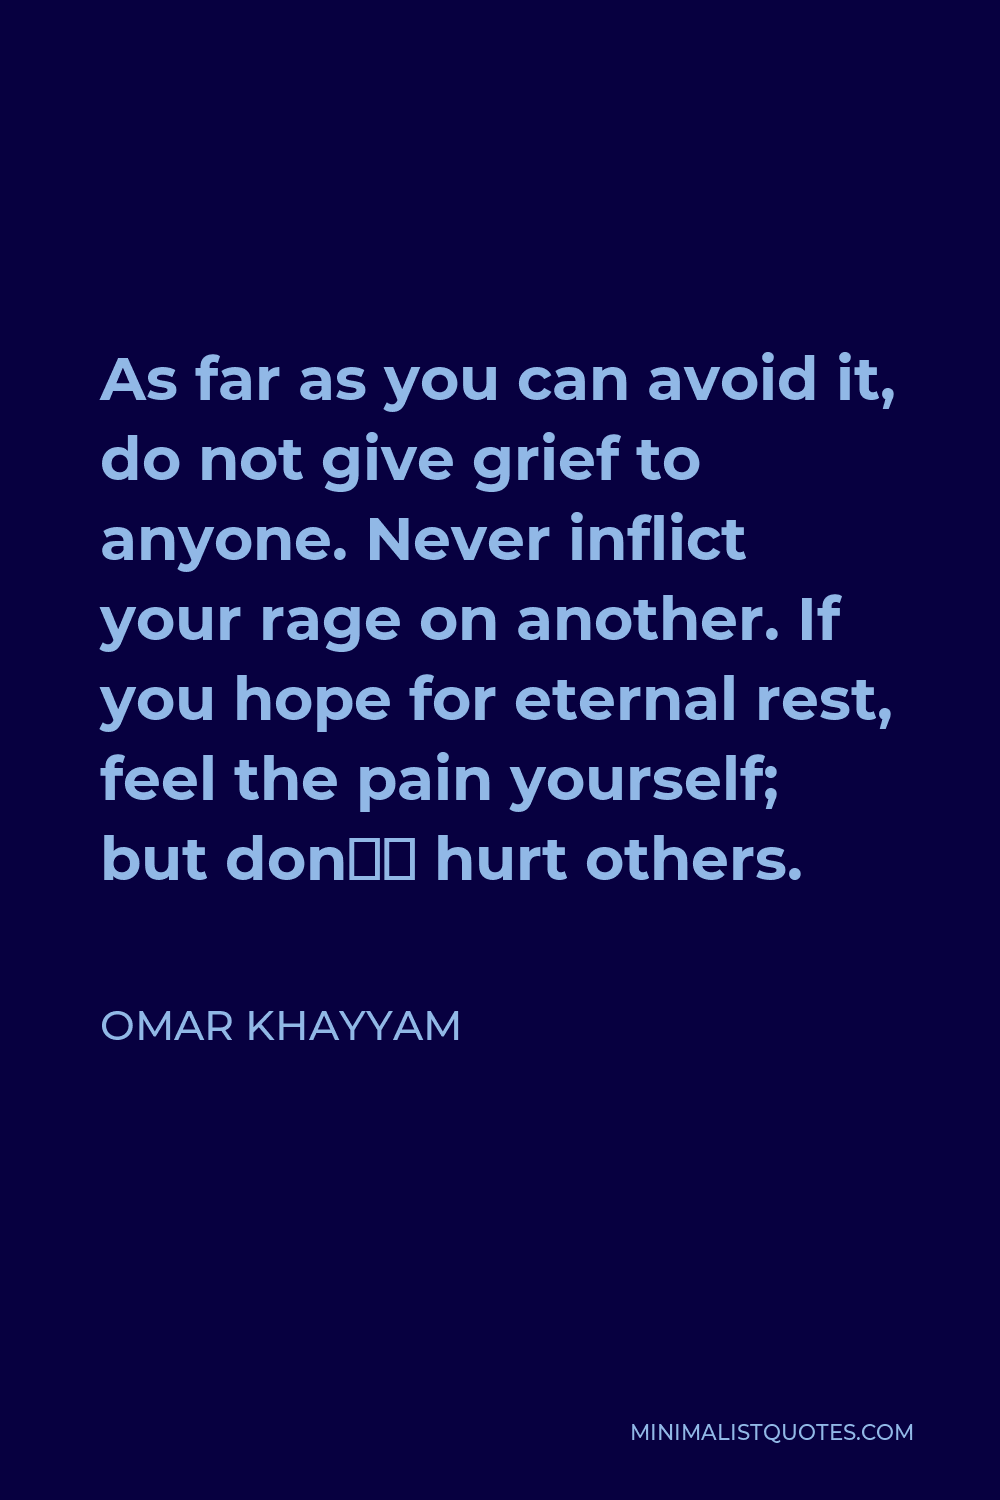 Omar Khayyam Quote - As far as you can avoid it, do not give grief to anyone. Never inflict your rage on another. If you hope for eternal rest, feel the pain yourself; but don’t hurt others.